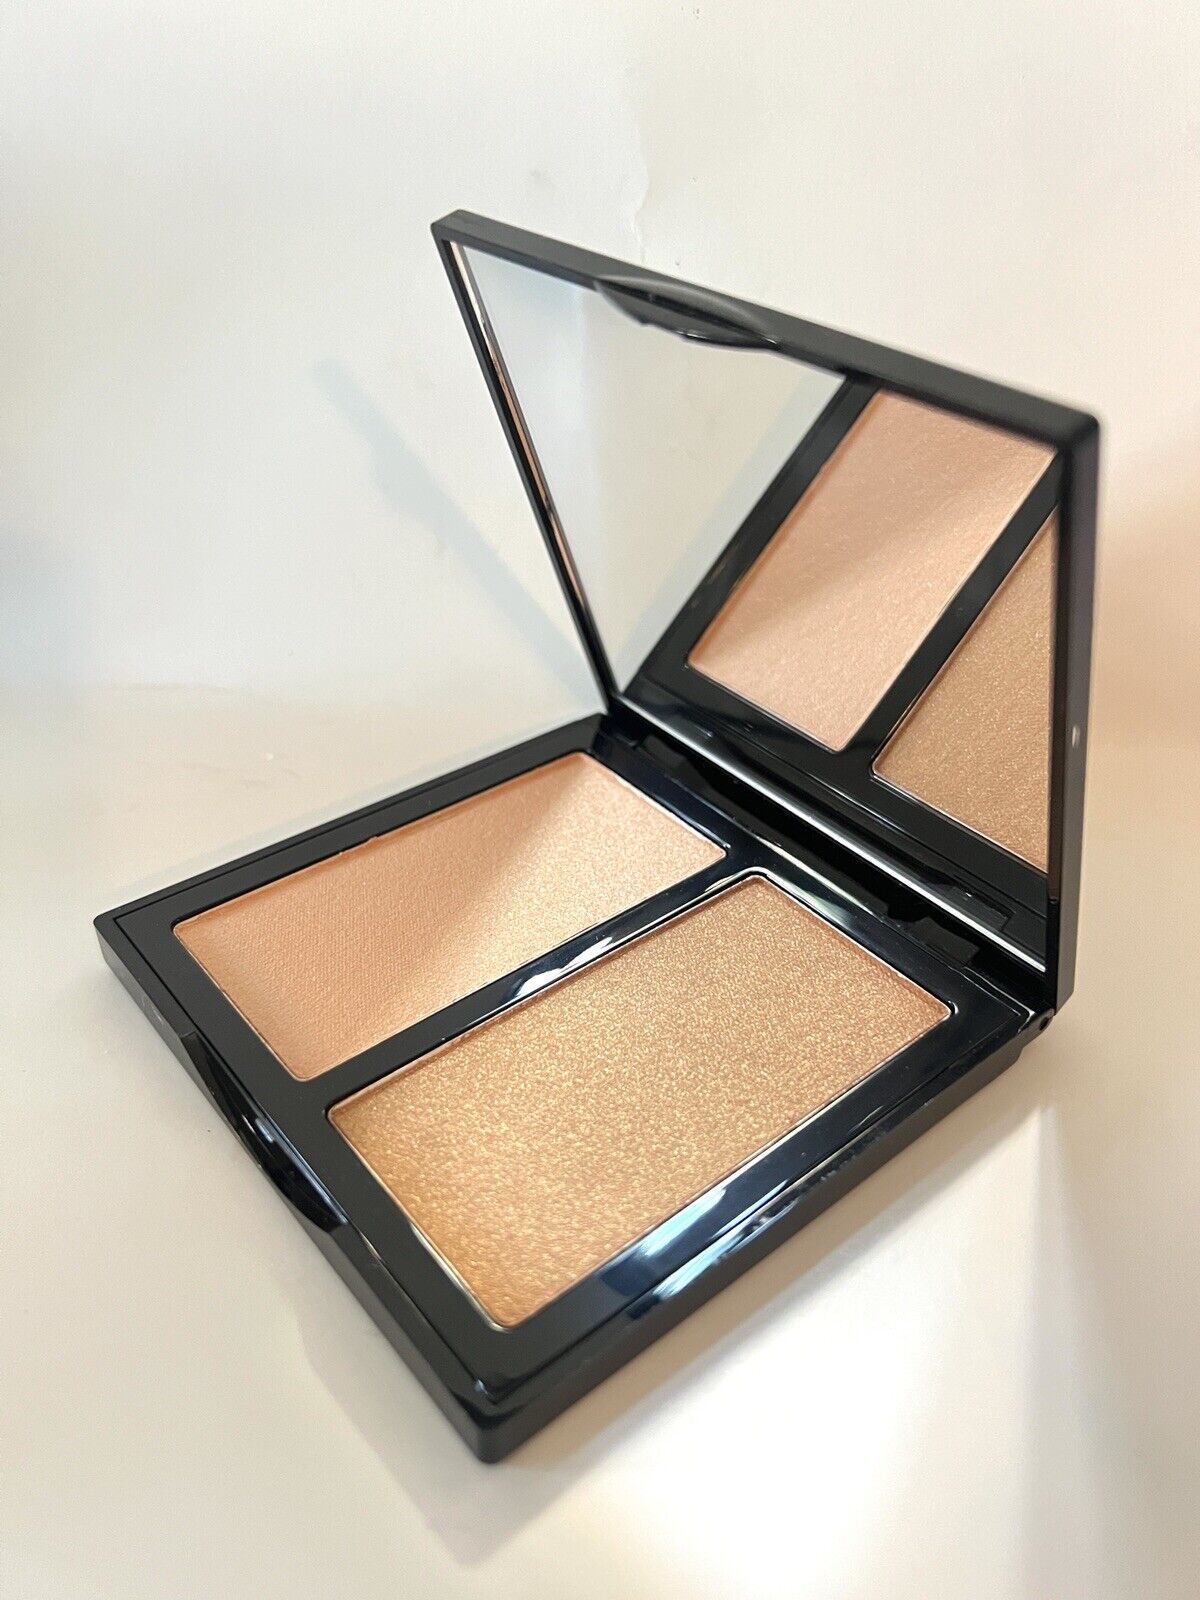 Trish McEvoy Light & Lift Face Color Duo Travel Compact Champagne Bronze NWOB - $61.00